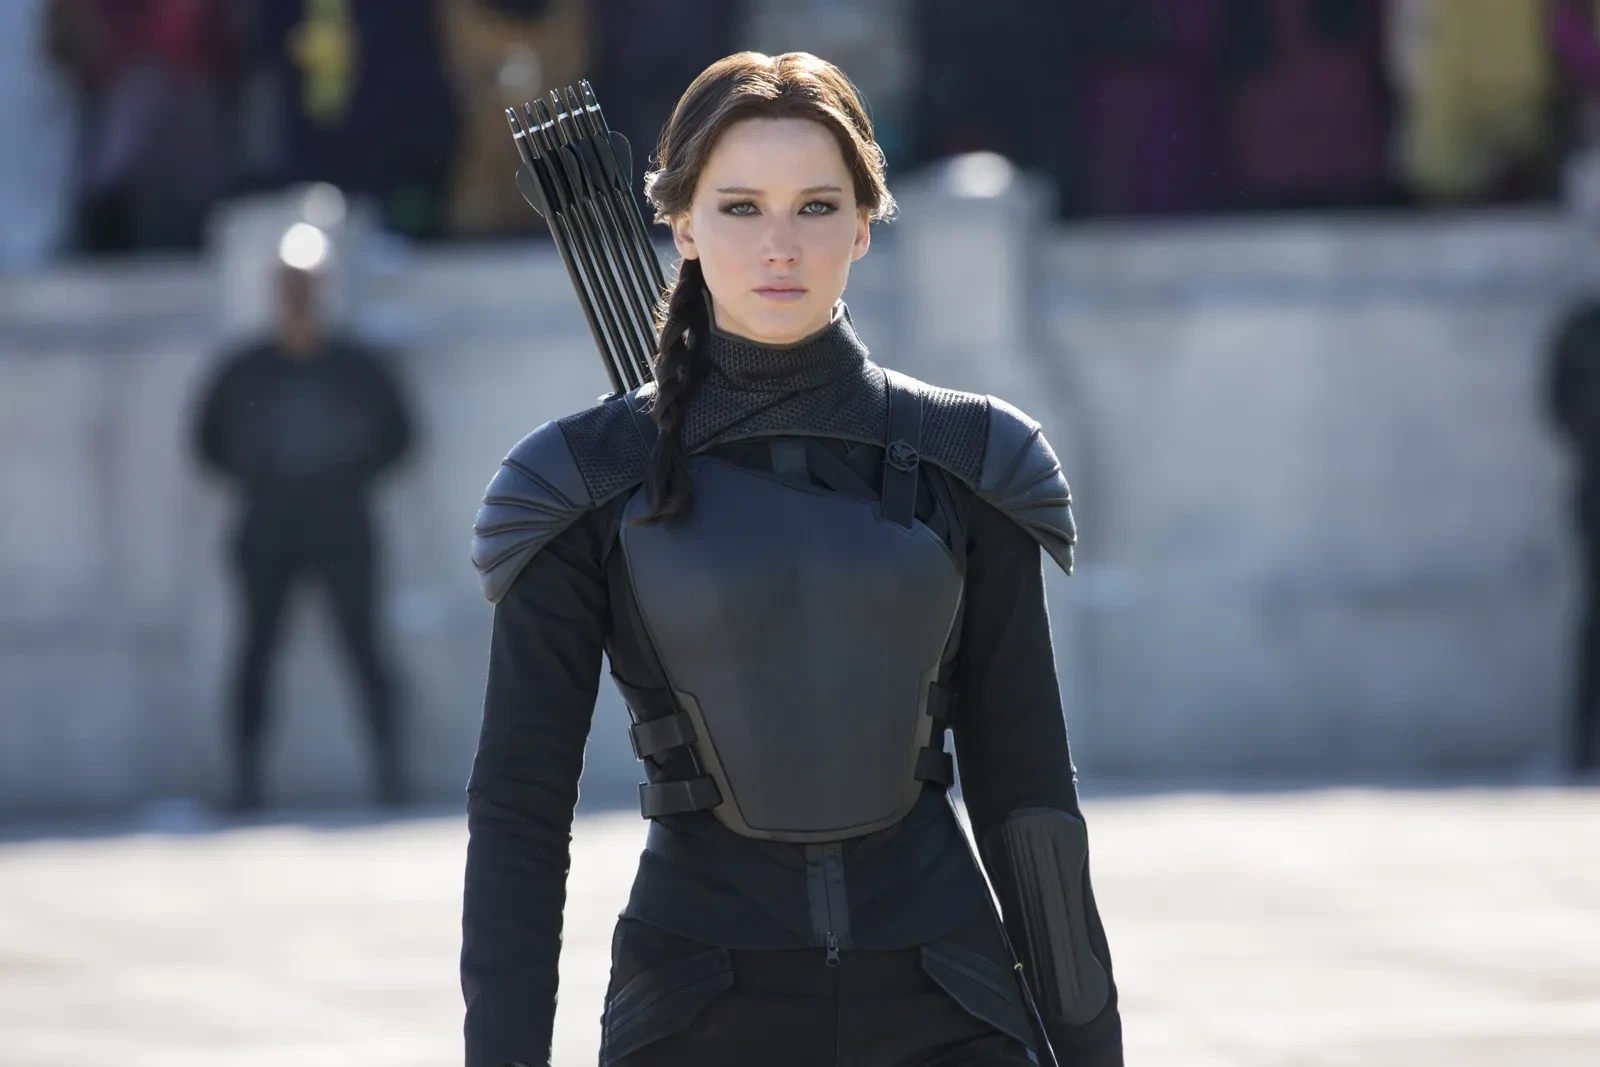 Jennifer Lawrence in a still from the Hunger Games franchise 